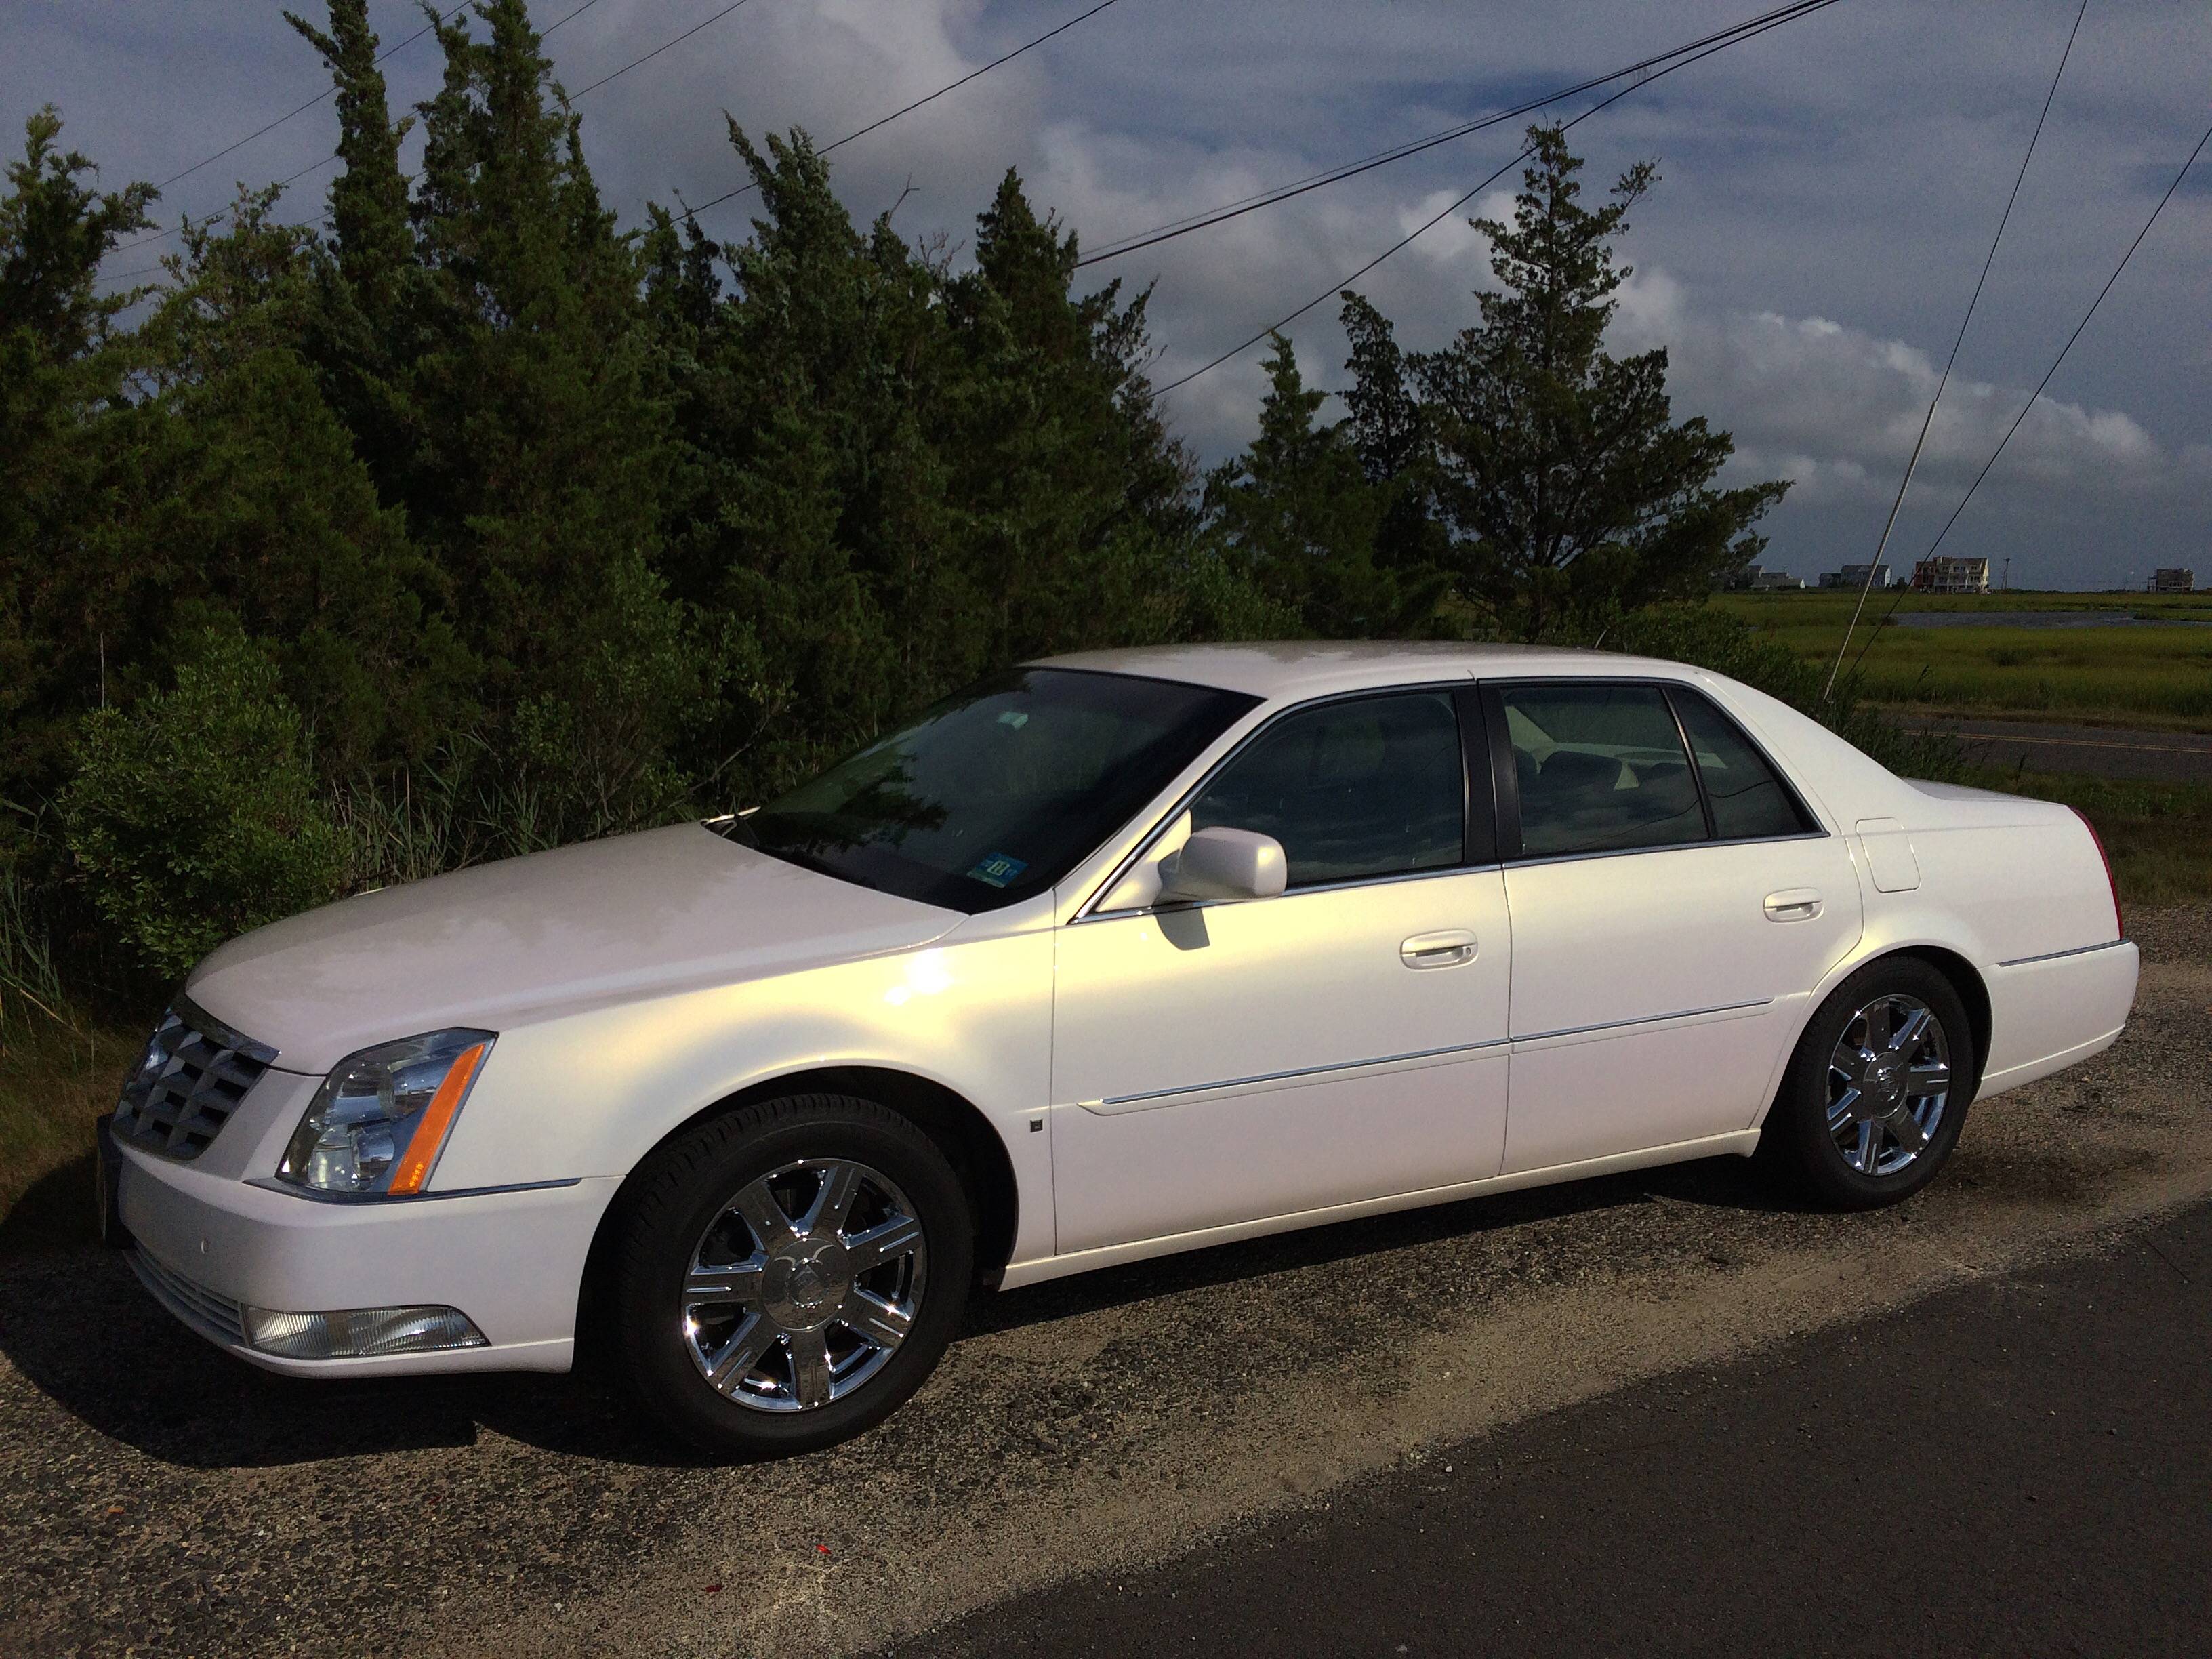 2007 Cadillac DTS Full Paint Detail Results | Lincoln vs Cadillac Forums